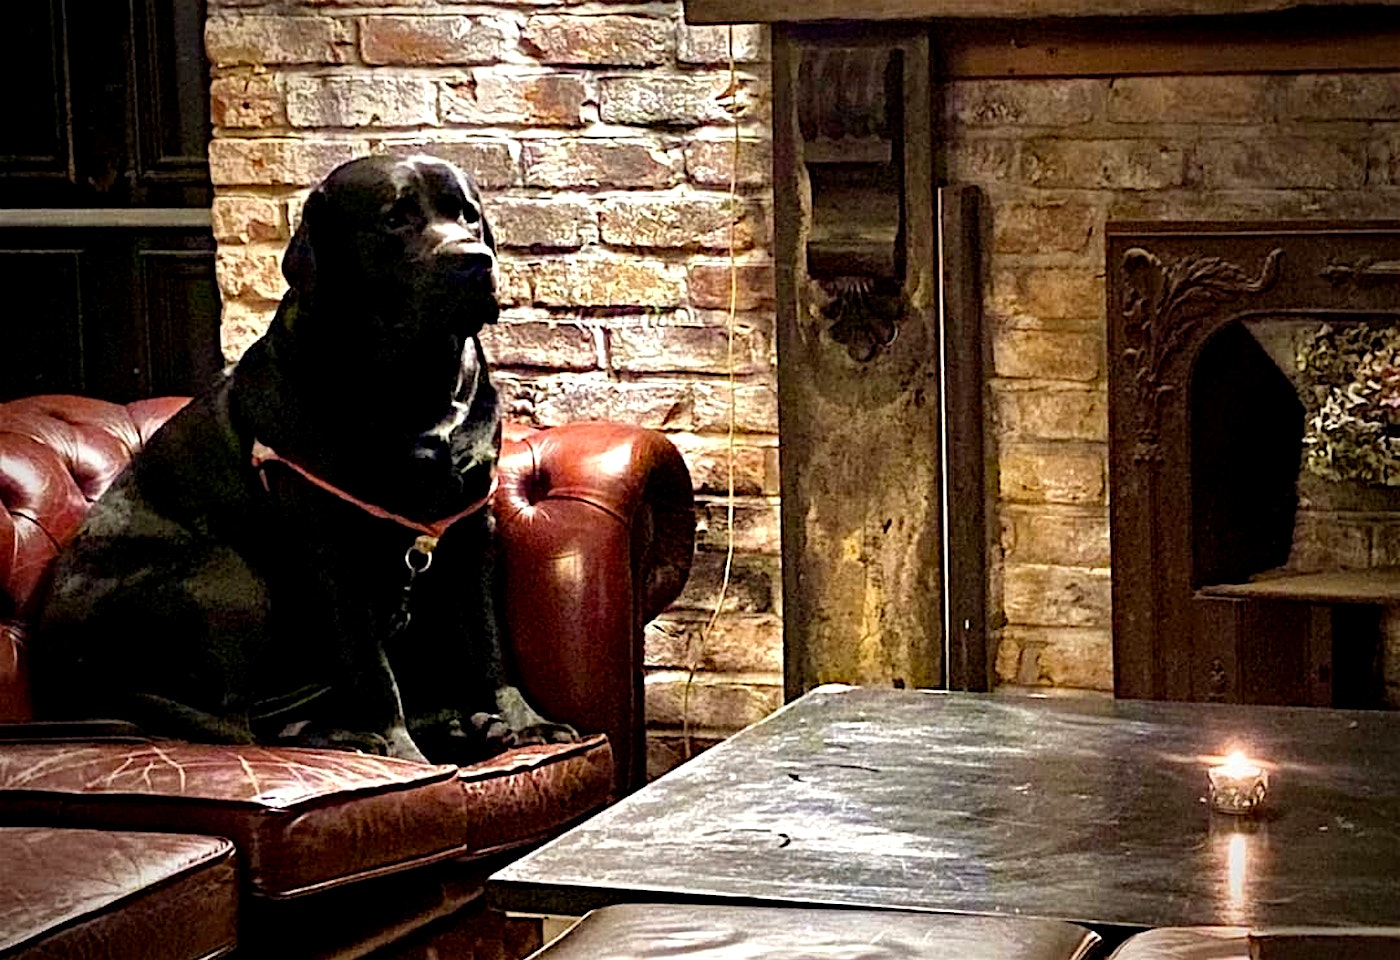 A pub dog in Magpie and Stump, a pub in St Paul's London